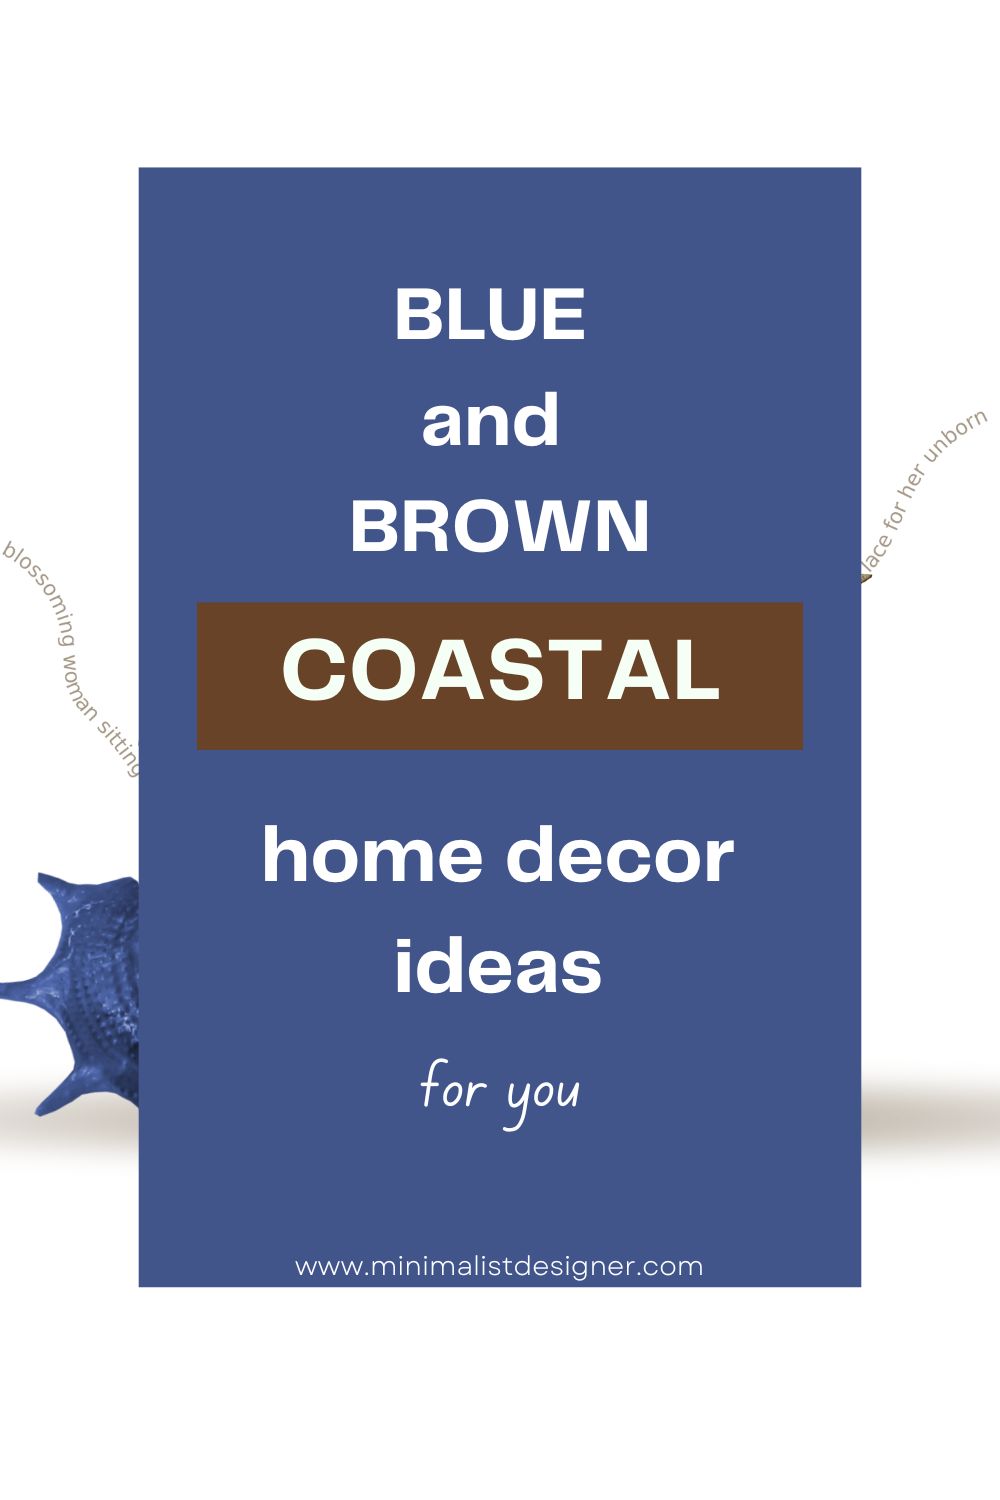 Coastal home decor ideas featuring earthy tones with blue accents